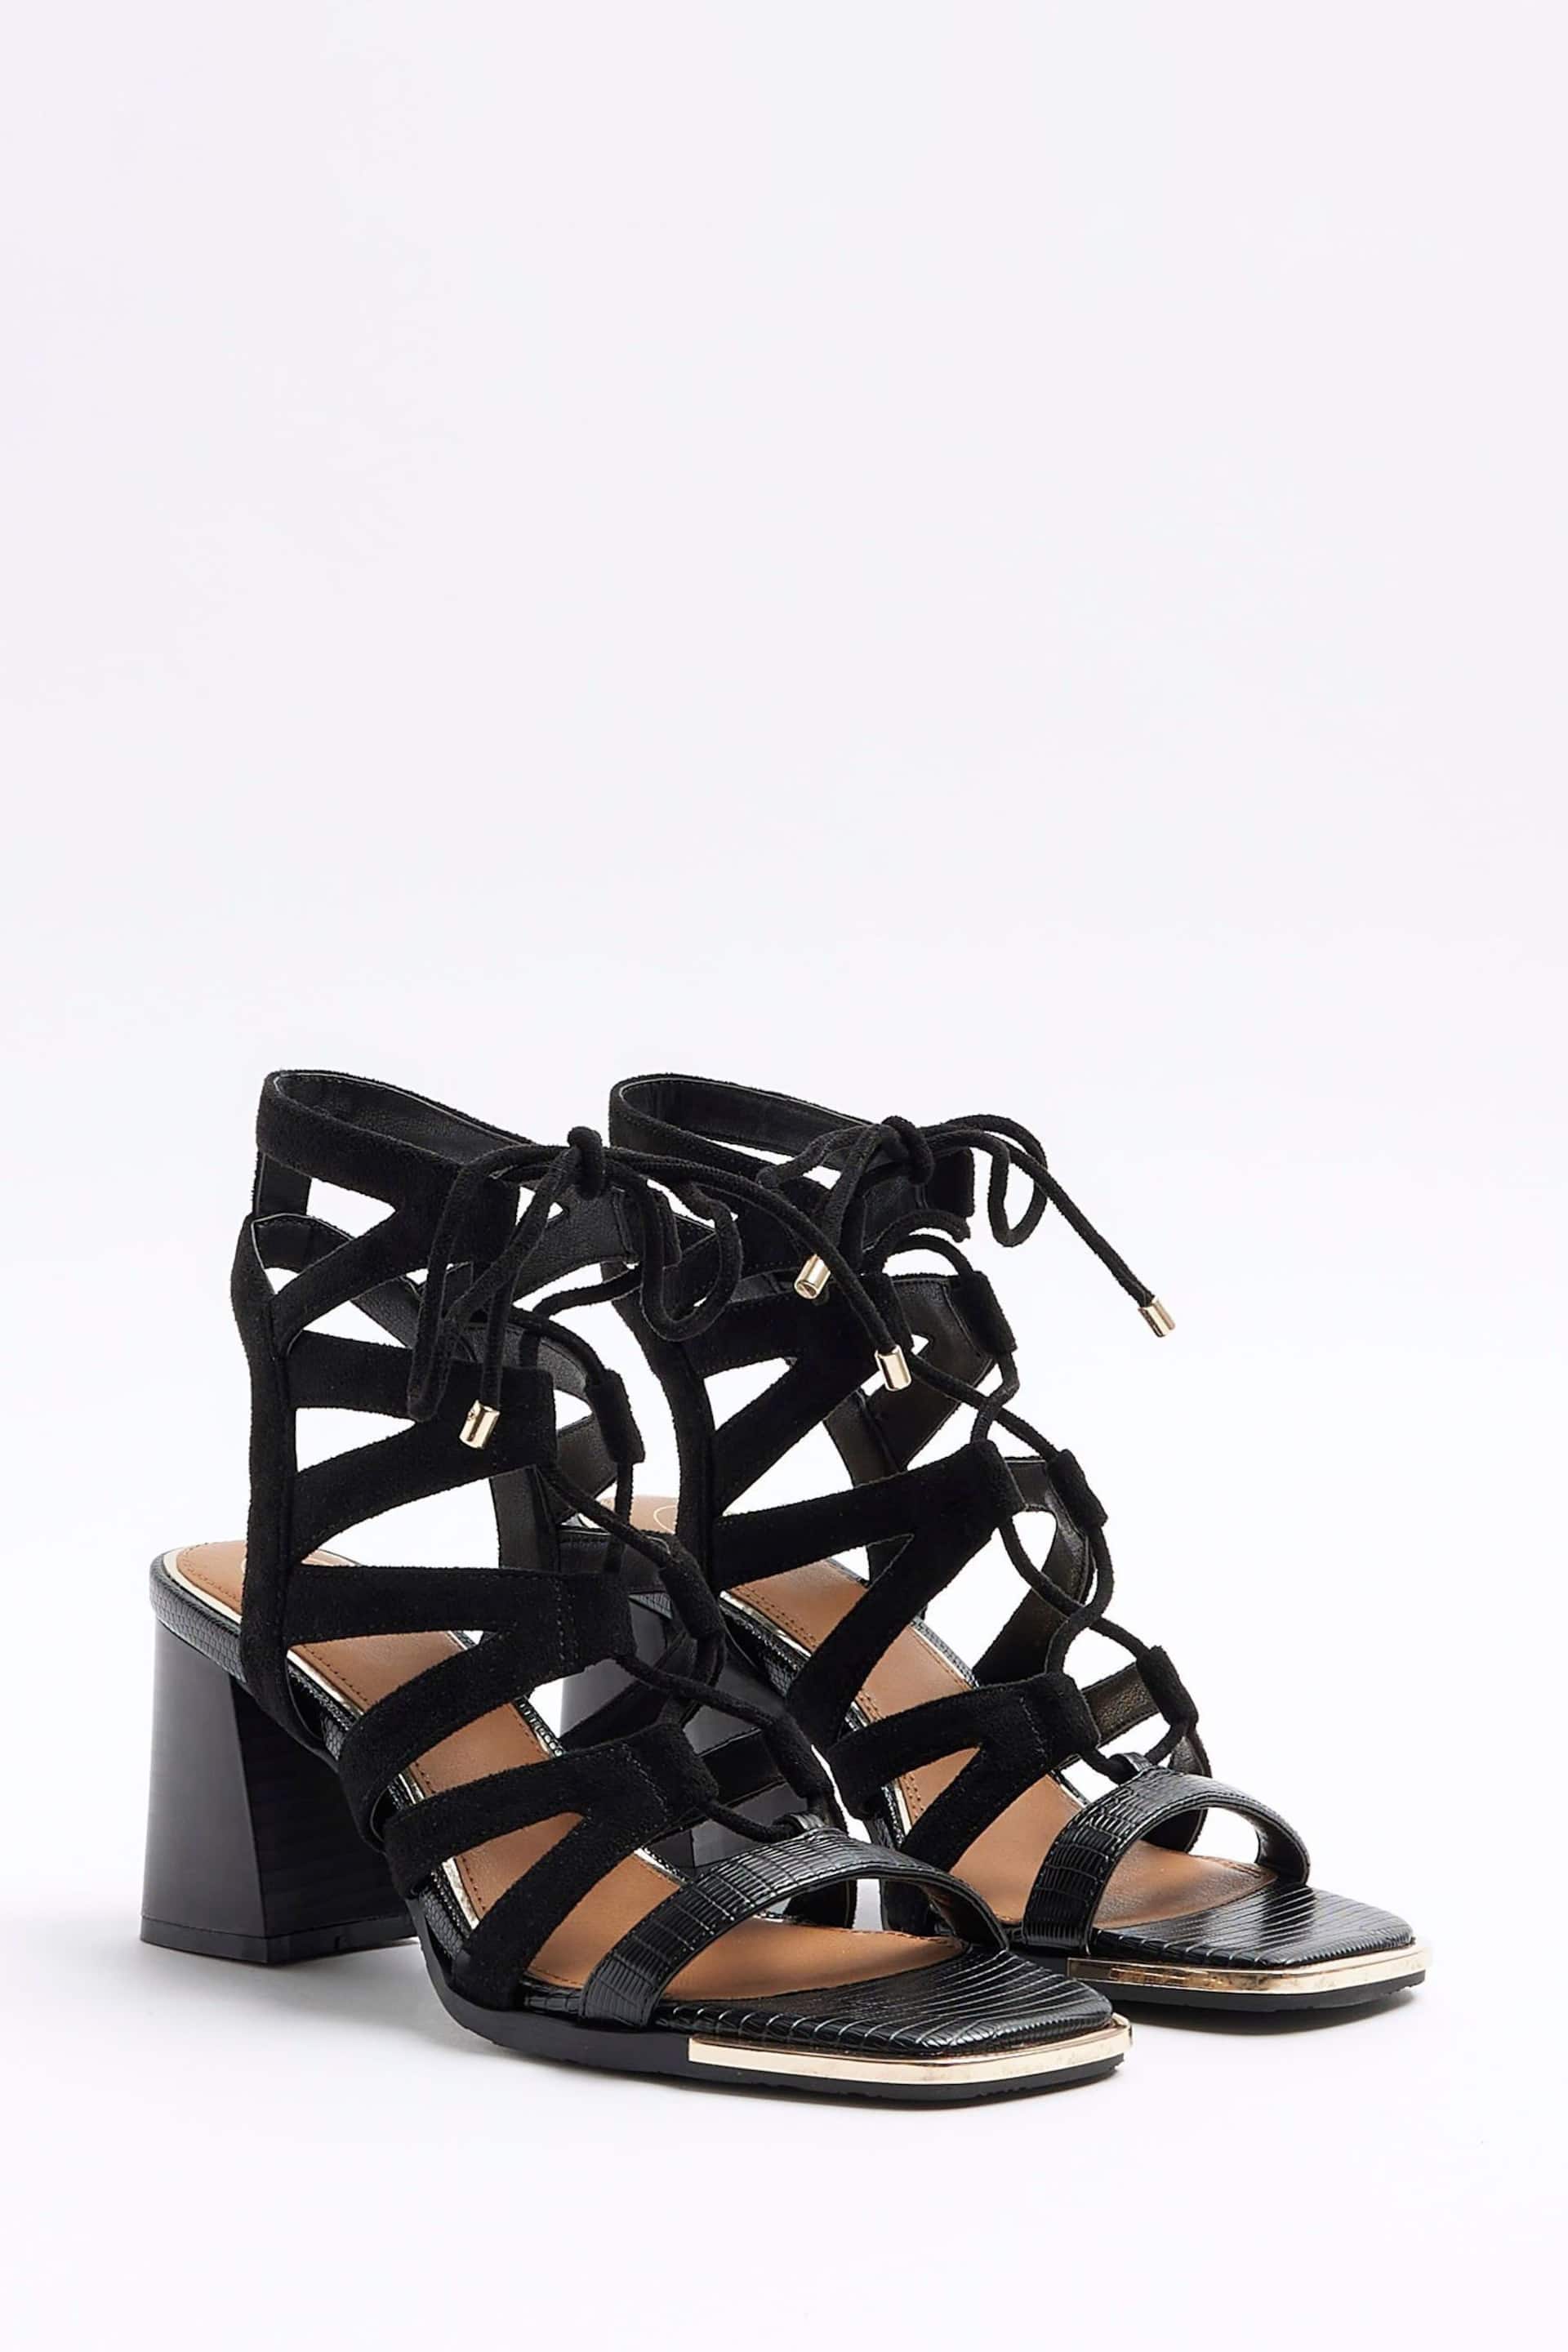 River Island Black Lace Up Heeled Sandals - Image 2 of 4